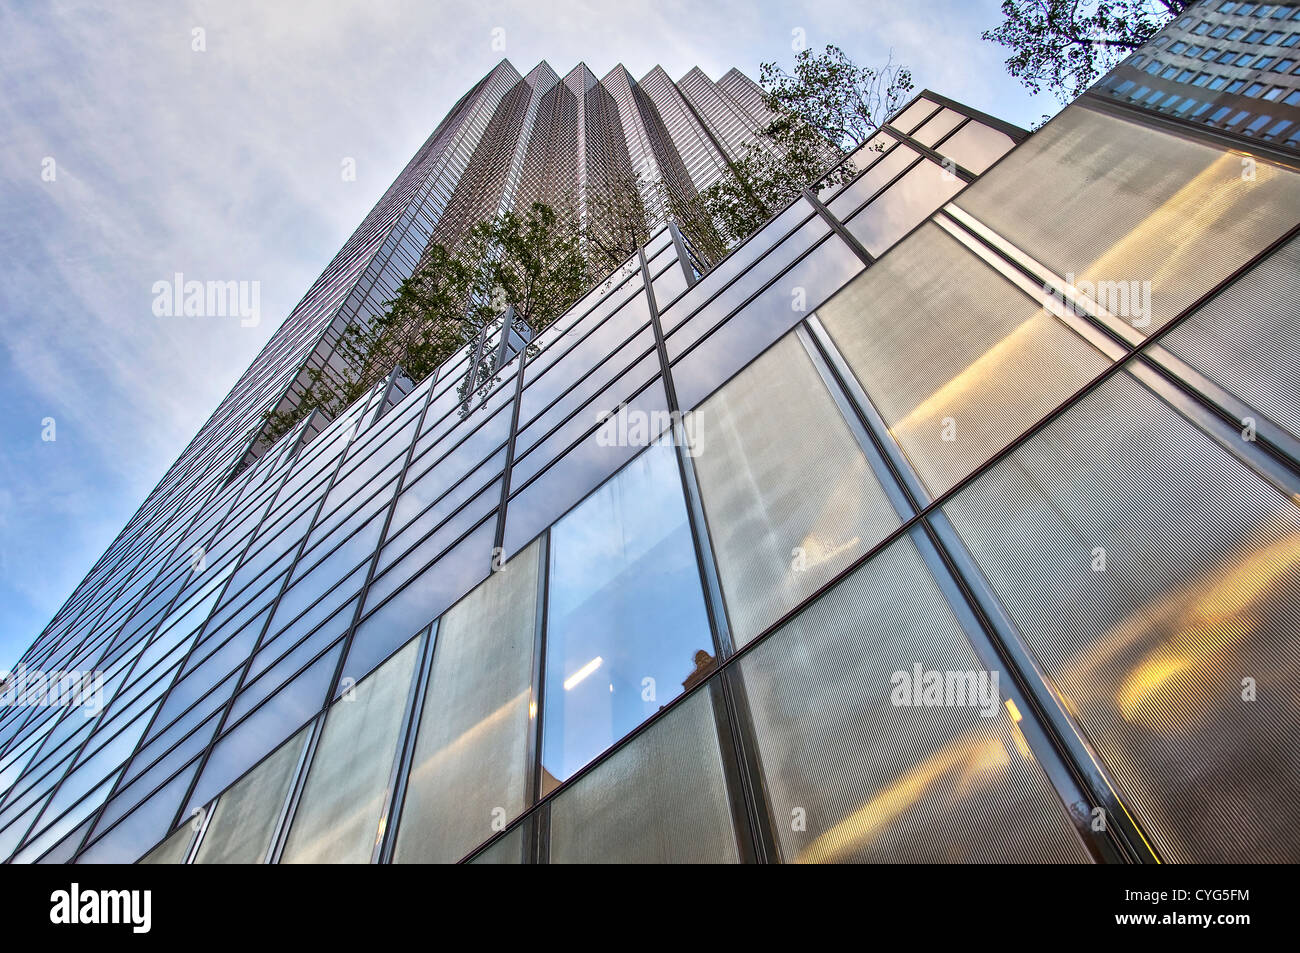 The Trump tower on the 5th avenue, view from below - Manhattan, New York, USA Stock Photo